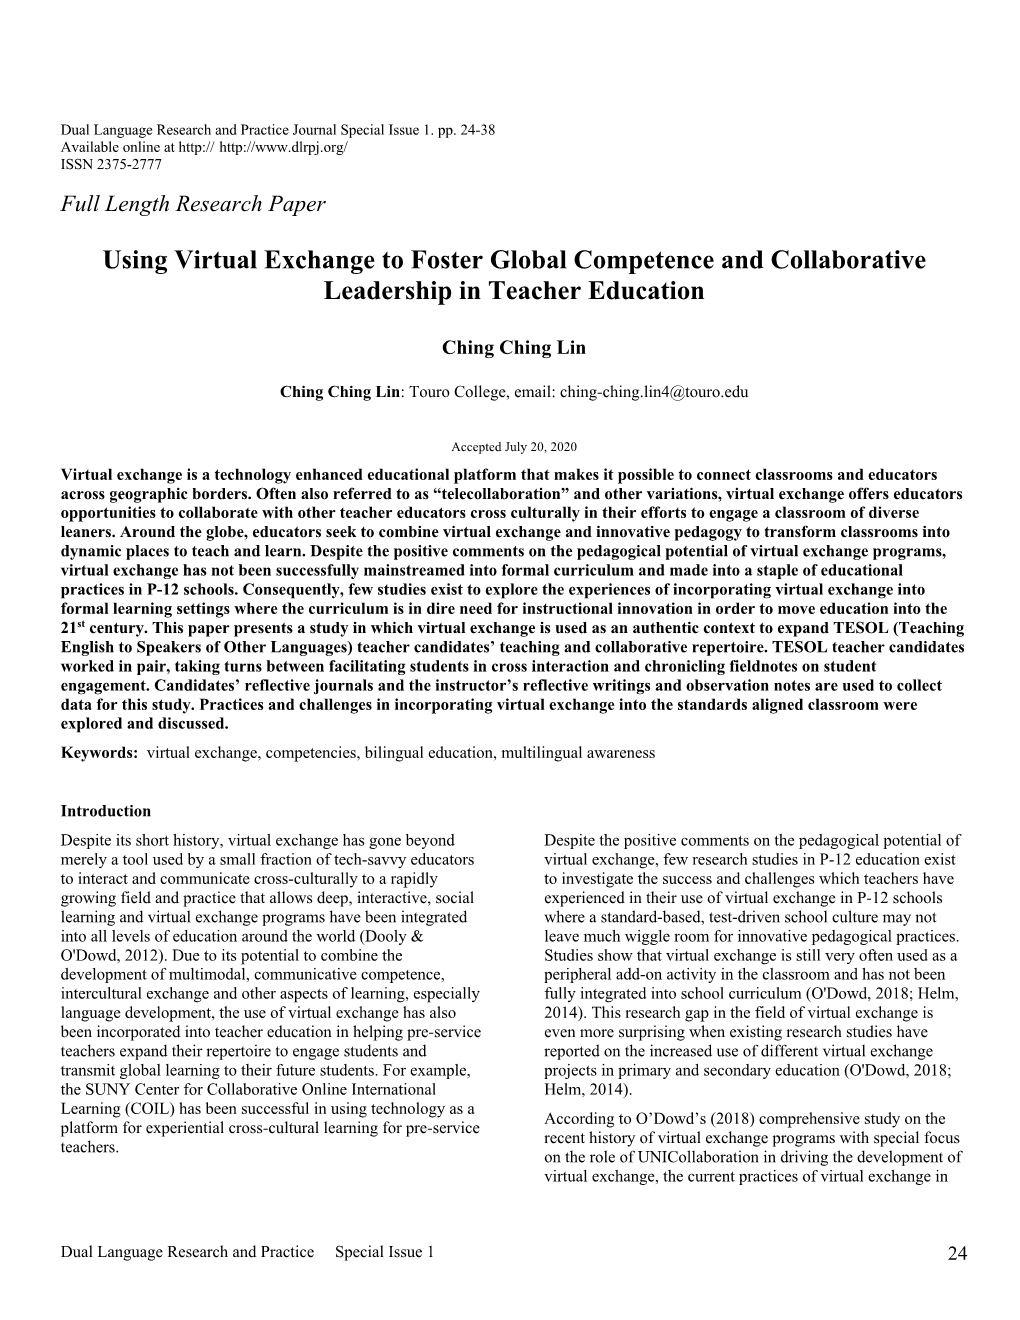 Using Virtual Exchange to Foster Global Competence and Collaborative Leadership in Teacher Education